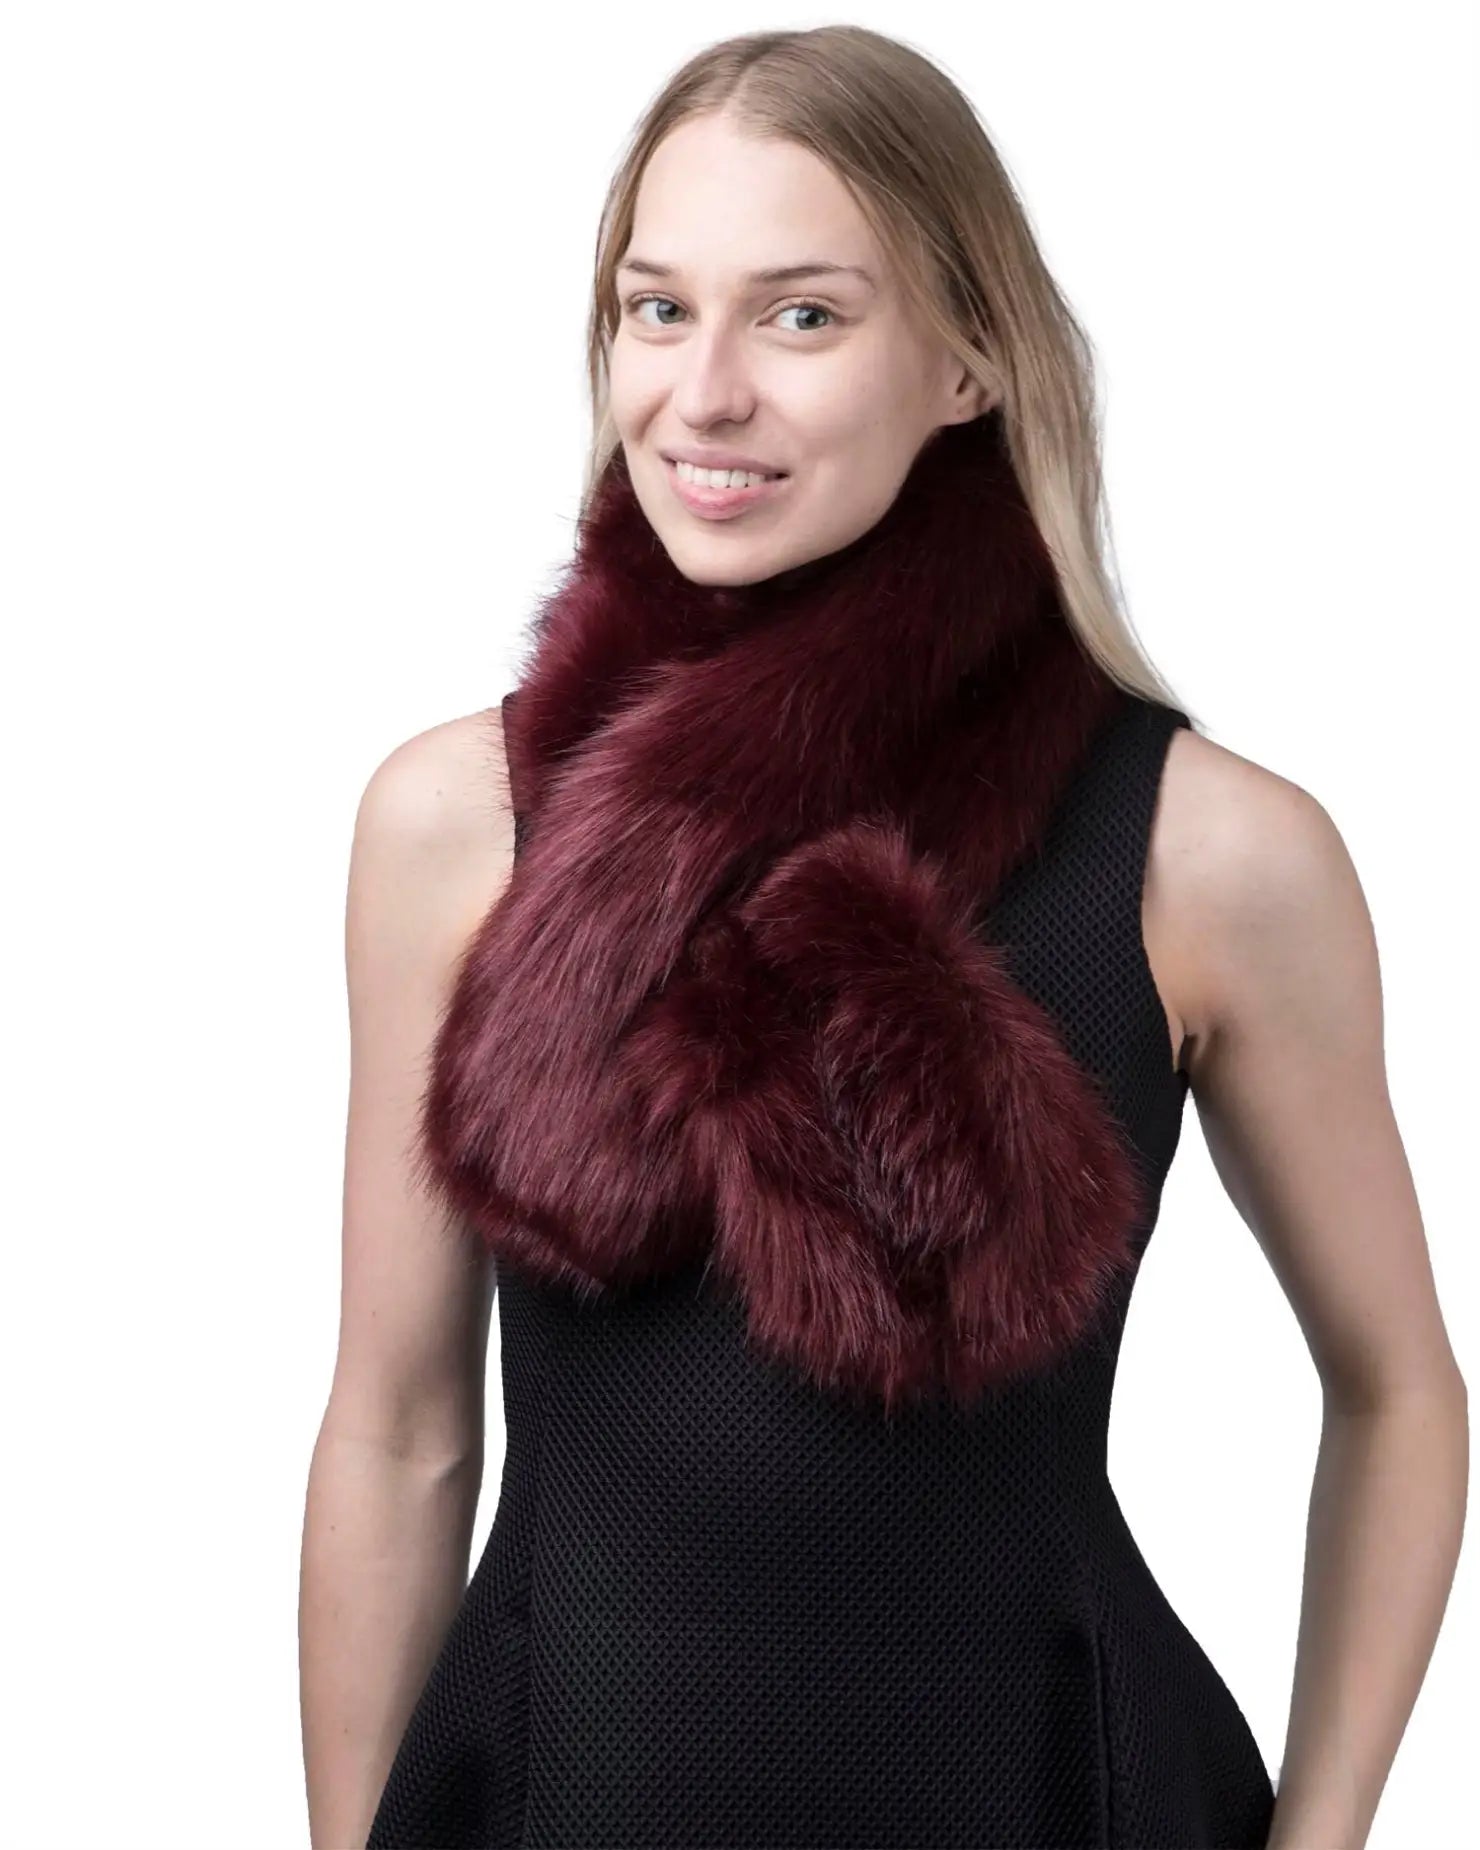 Fluffy faux fur collar tippet wrap scarf with suede lining worn by woman in burgundy faux fur stole.